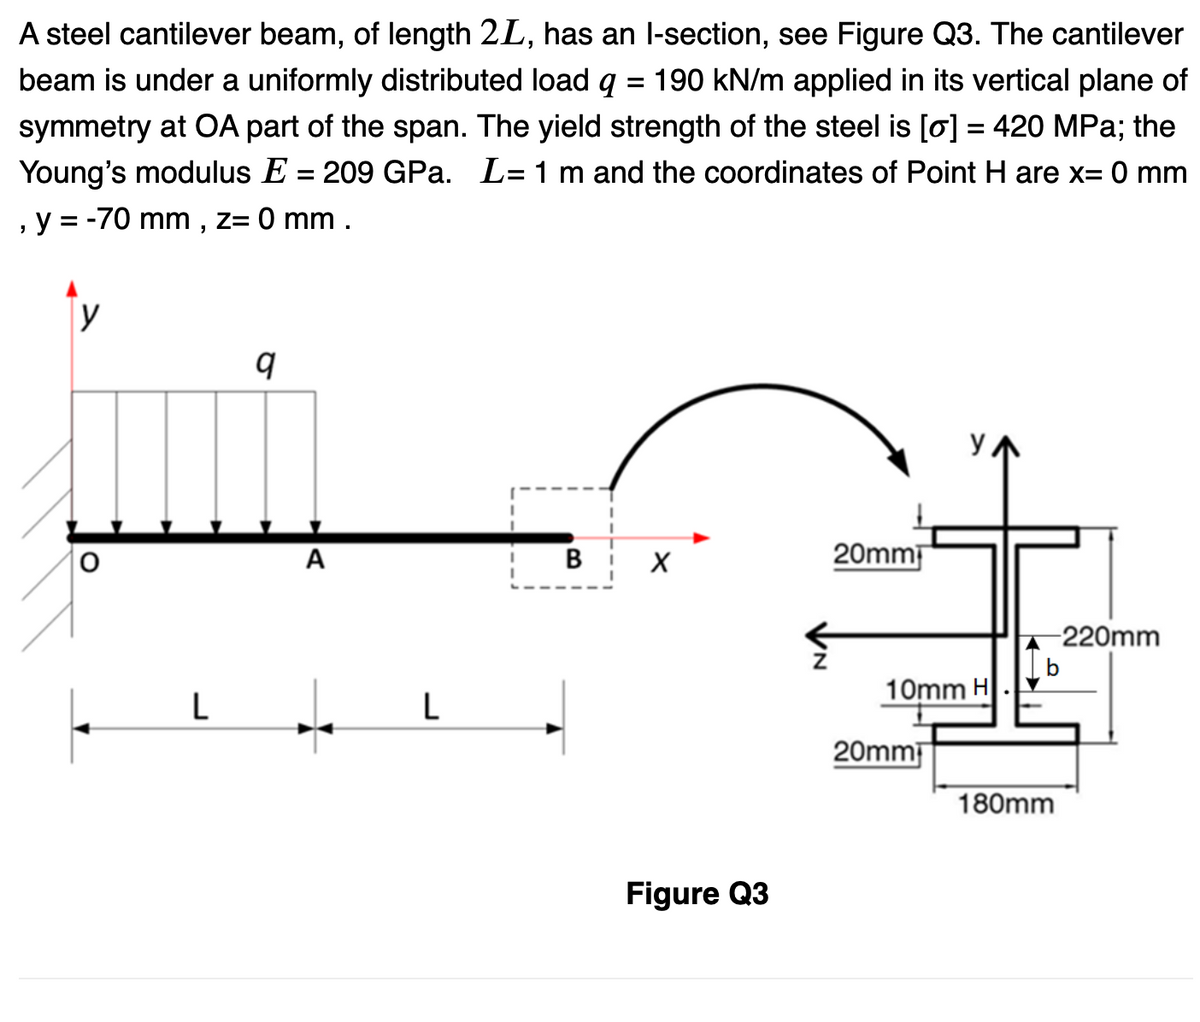 A steel cantilever beam, of length 2L, has an I-section, see Figure Q3. The cantilever
beam is under a uniformly distributed load q = 190 kN/m applied in its vertical plane of
symmetry at OA part of the span. The yield strength of the steel is [o] = 420 MPa; the
Young's modulus E = 209 GPa. L= 1 m and the coordinates of Point H are x= 0 mm
, y = -70 mm, z= 0 mm .
y
lumi
L
A
L
B X
Figure Q3
20mm
у,
10mm H
20mm
-220mm
b
180mm